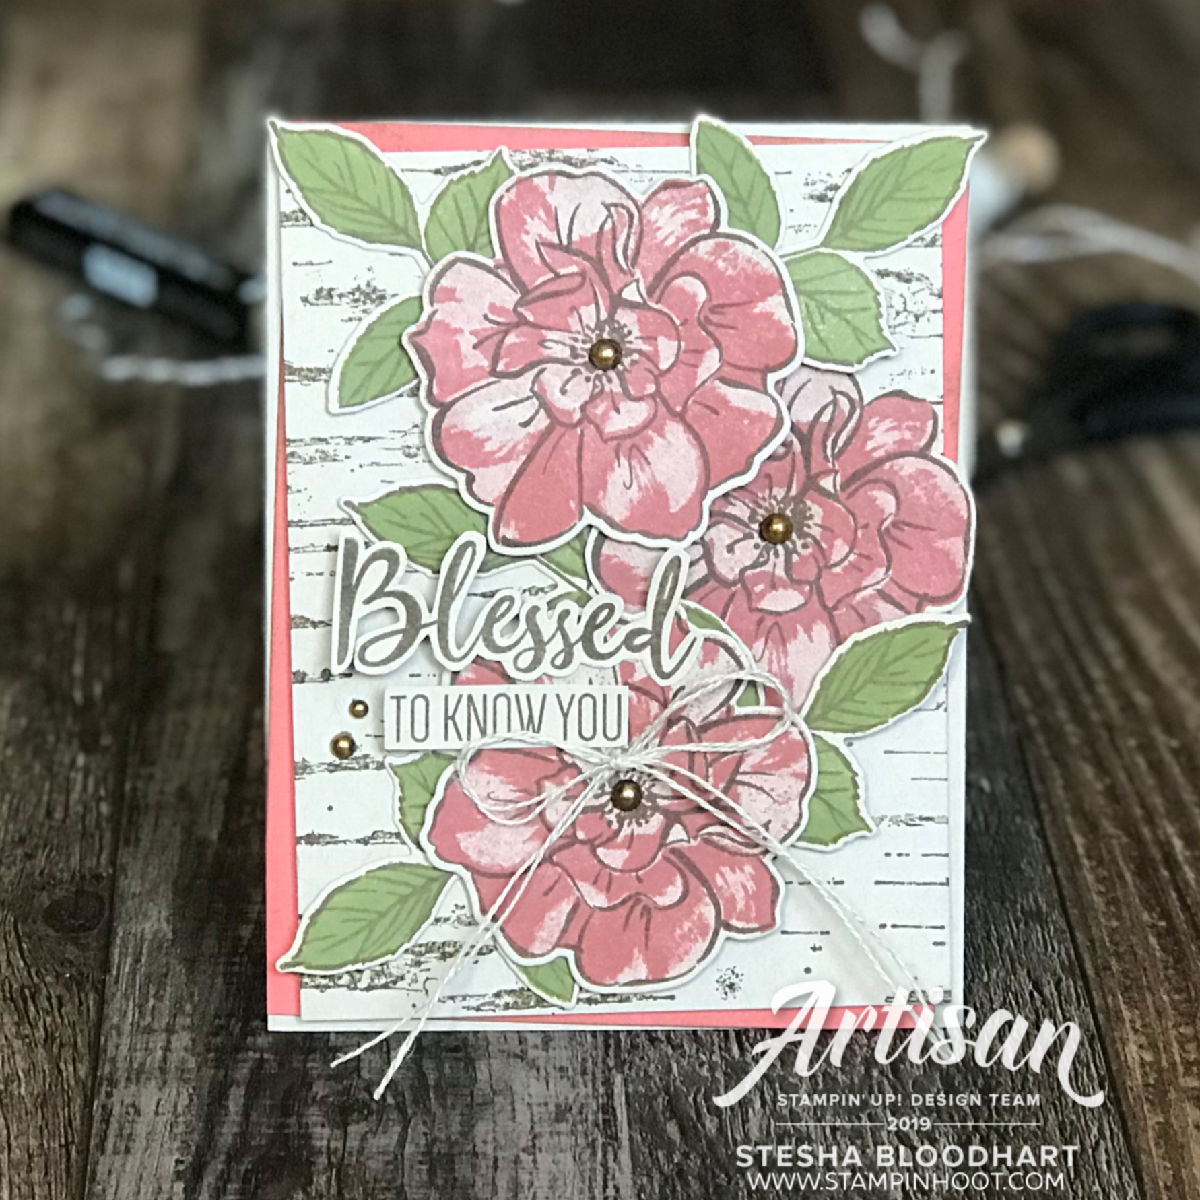 To A Wild Rose Bundle & Terracotta Tile In Color from Stampin' Up! Card by 2019 Artisan Design Team Memeber, Stesha Bloodhart, Stampin' Hoot!